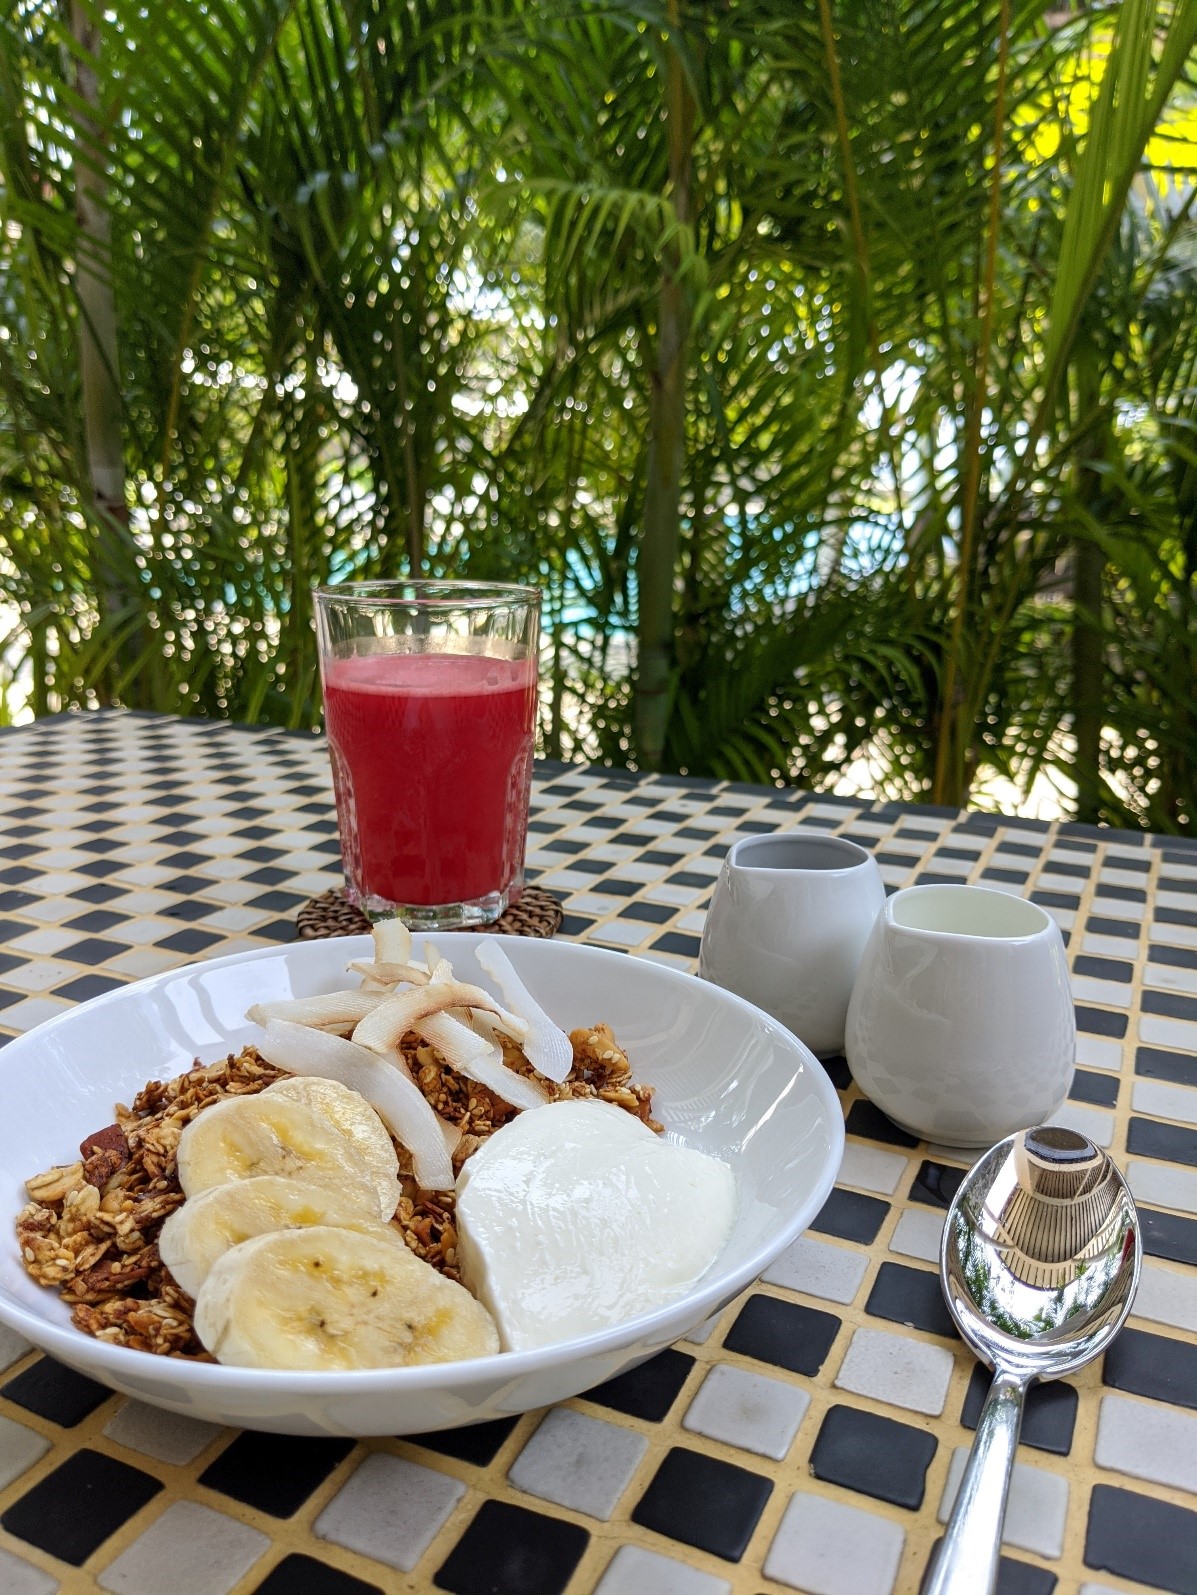 Banana Granola made with Kithul Treacle, from our breakfast menu.